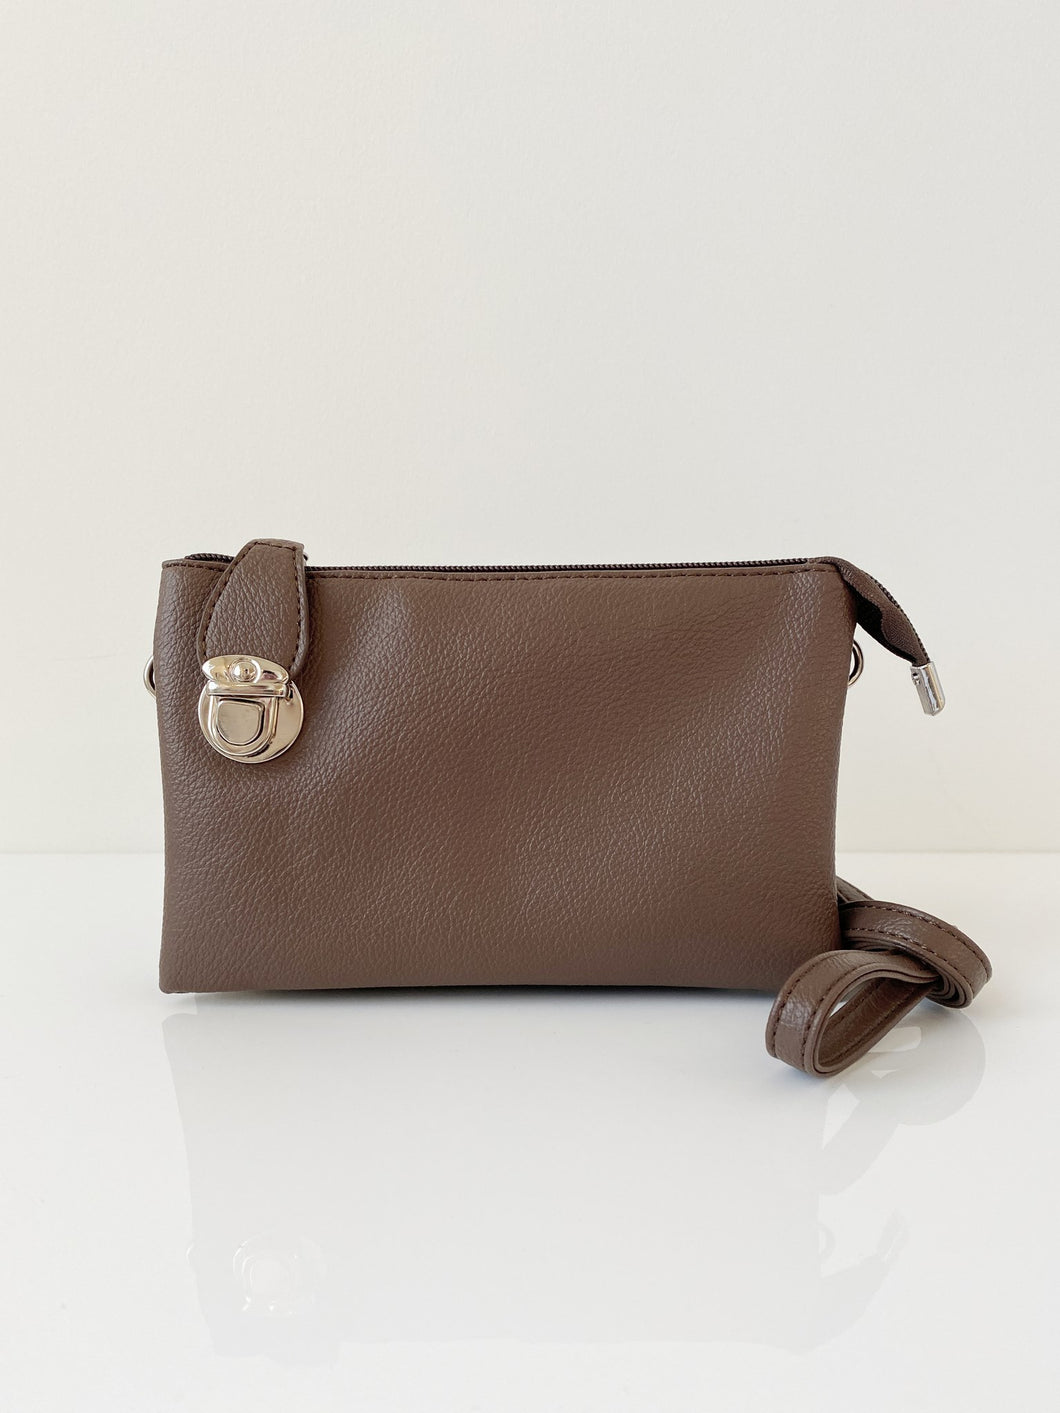 Claire - Crossbody Bag - Brown